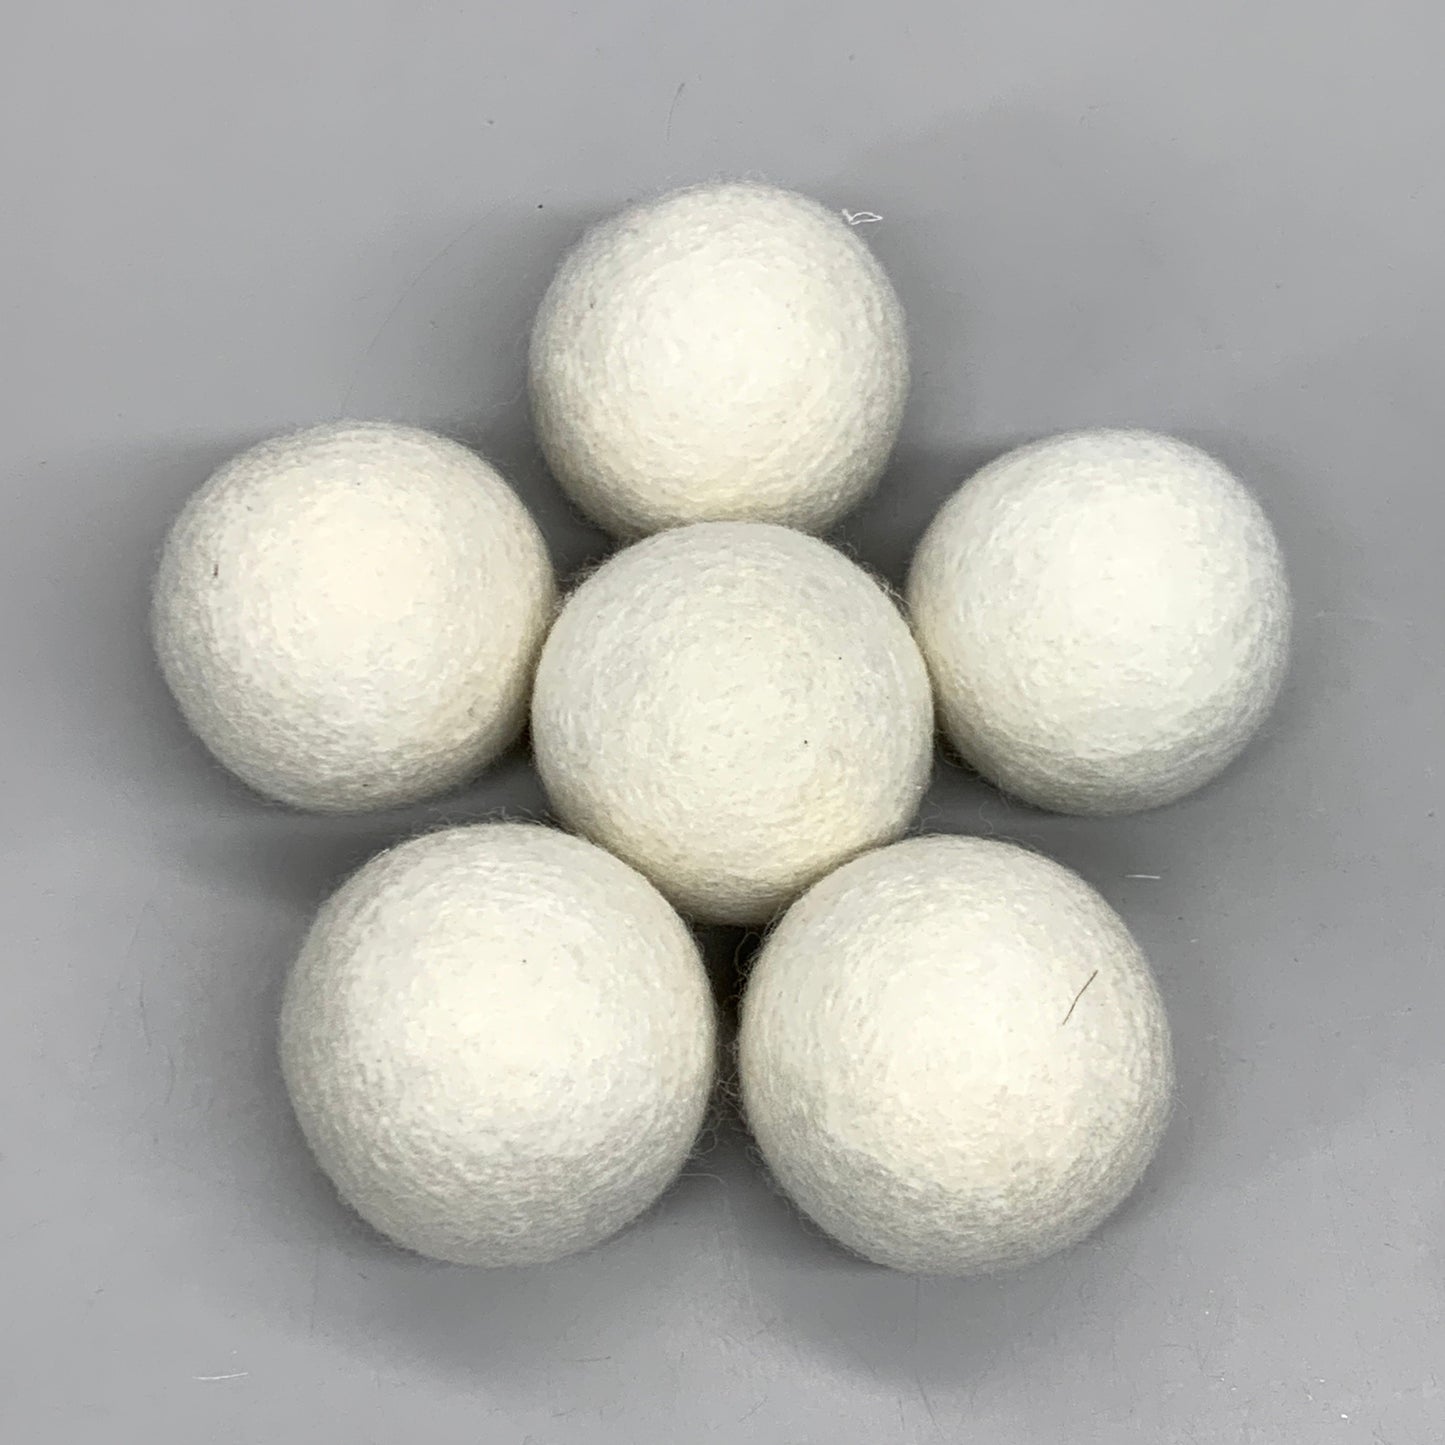 ZA@ MOLLY'S SUDS (2 PACK) Natural Wool Dryer Balls Natural Fabric Softener 6 Balls Total E